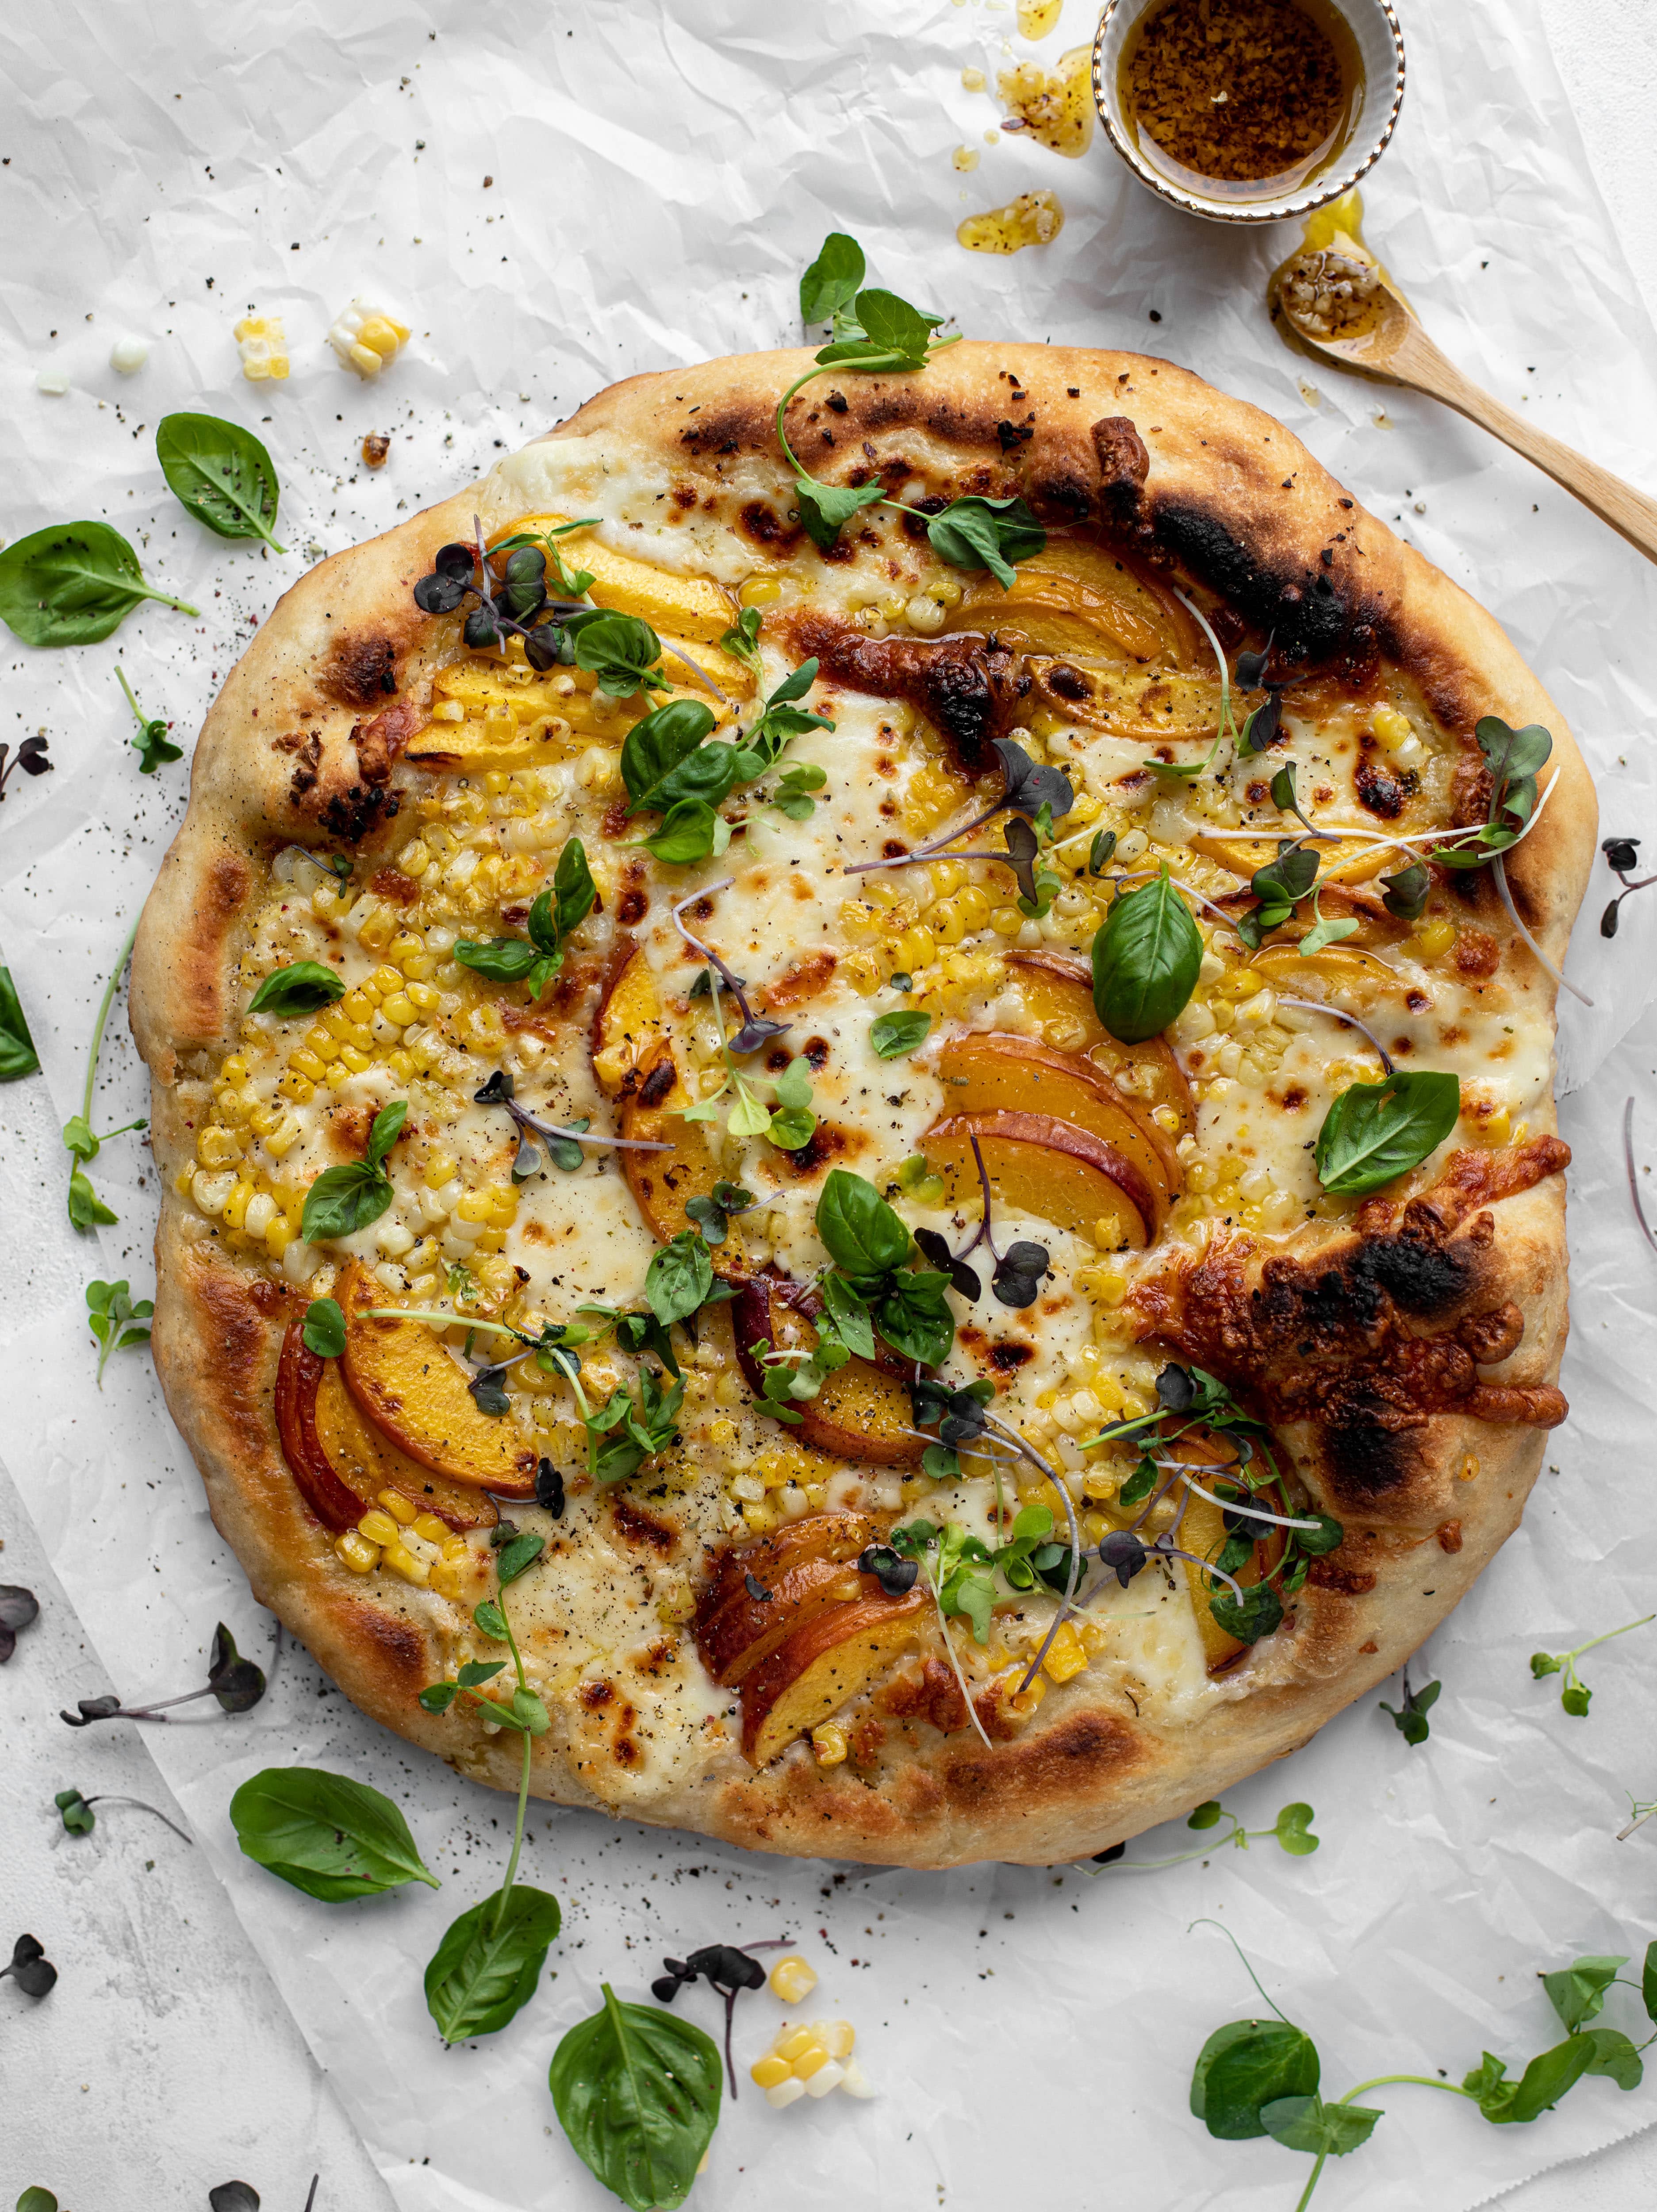 grilled peach pizza with corn and chili garlic oil